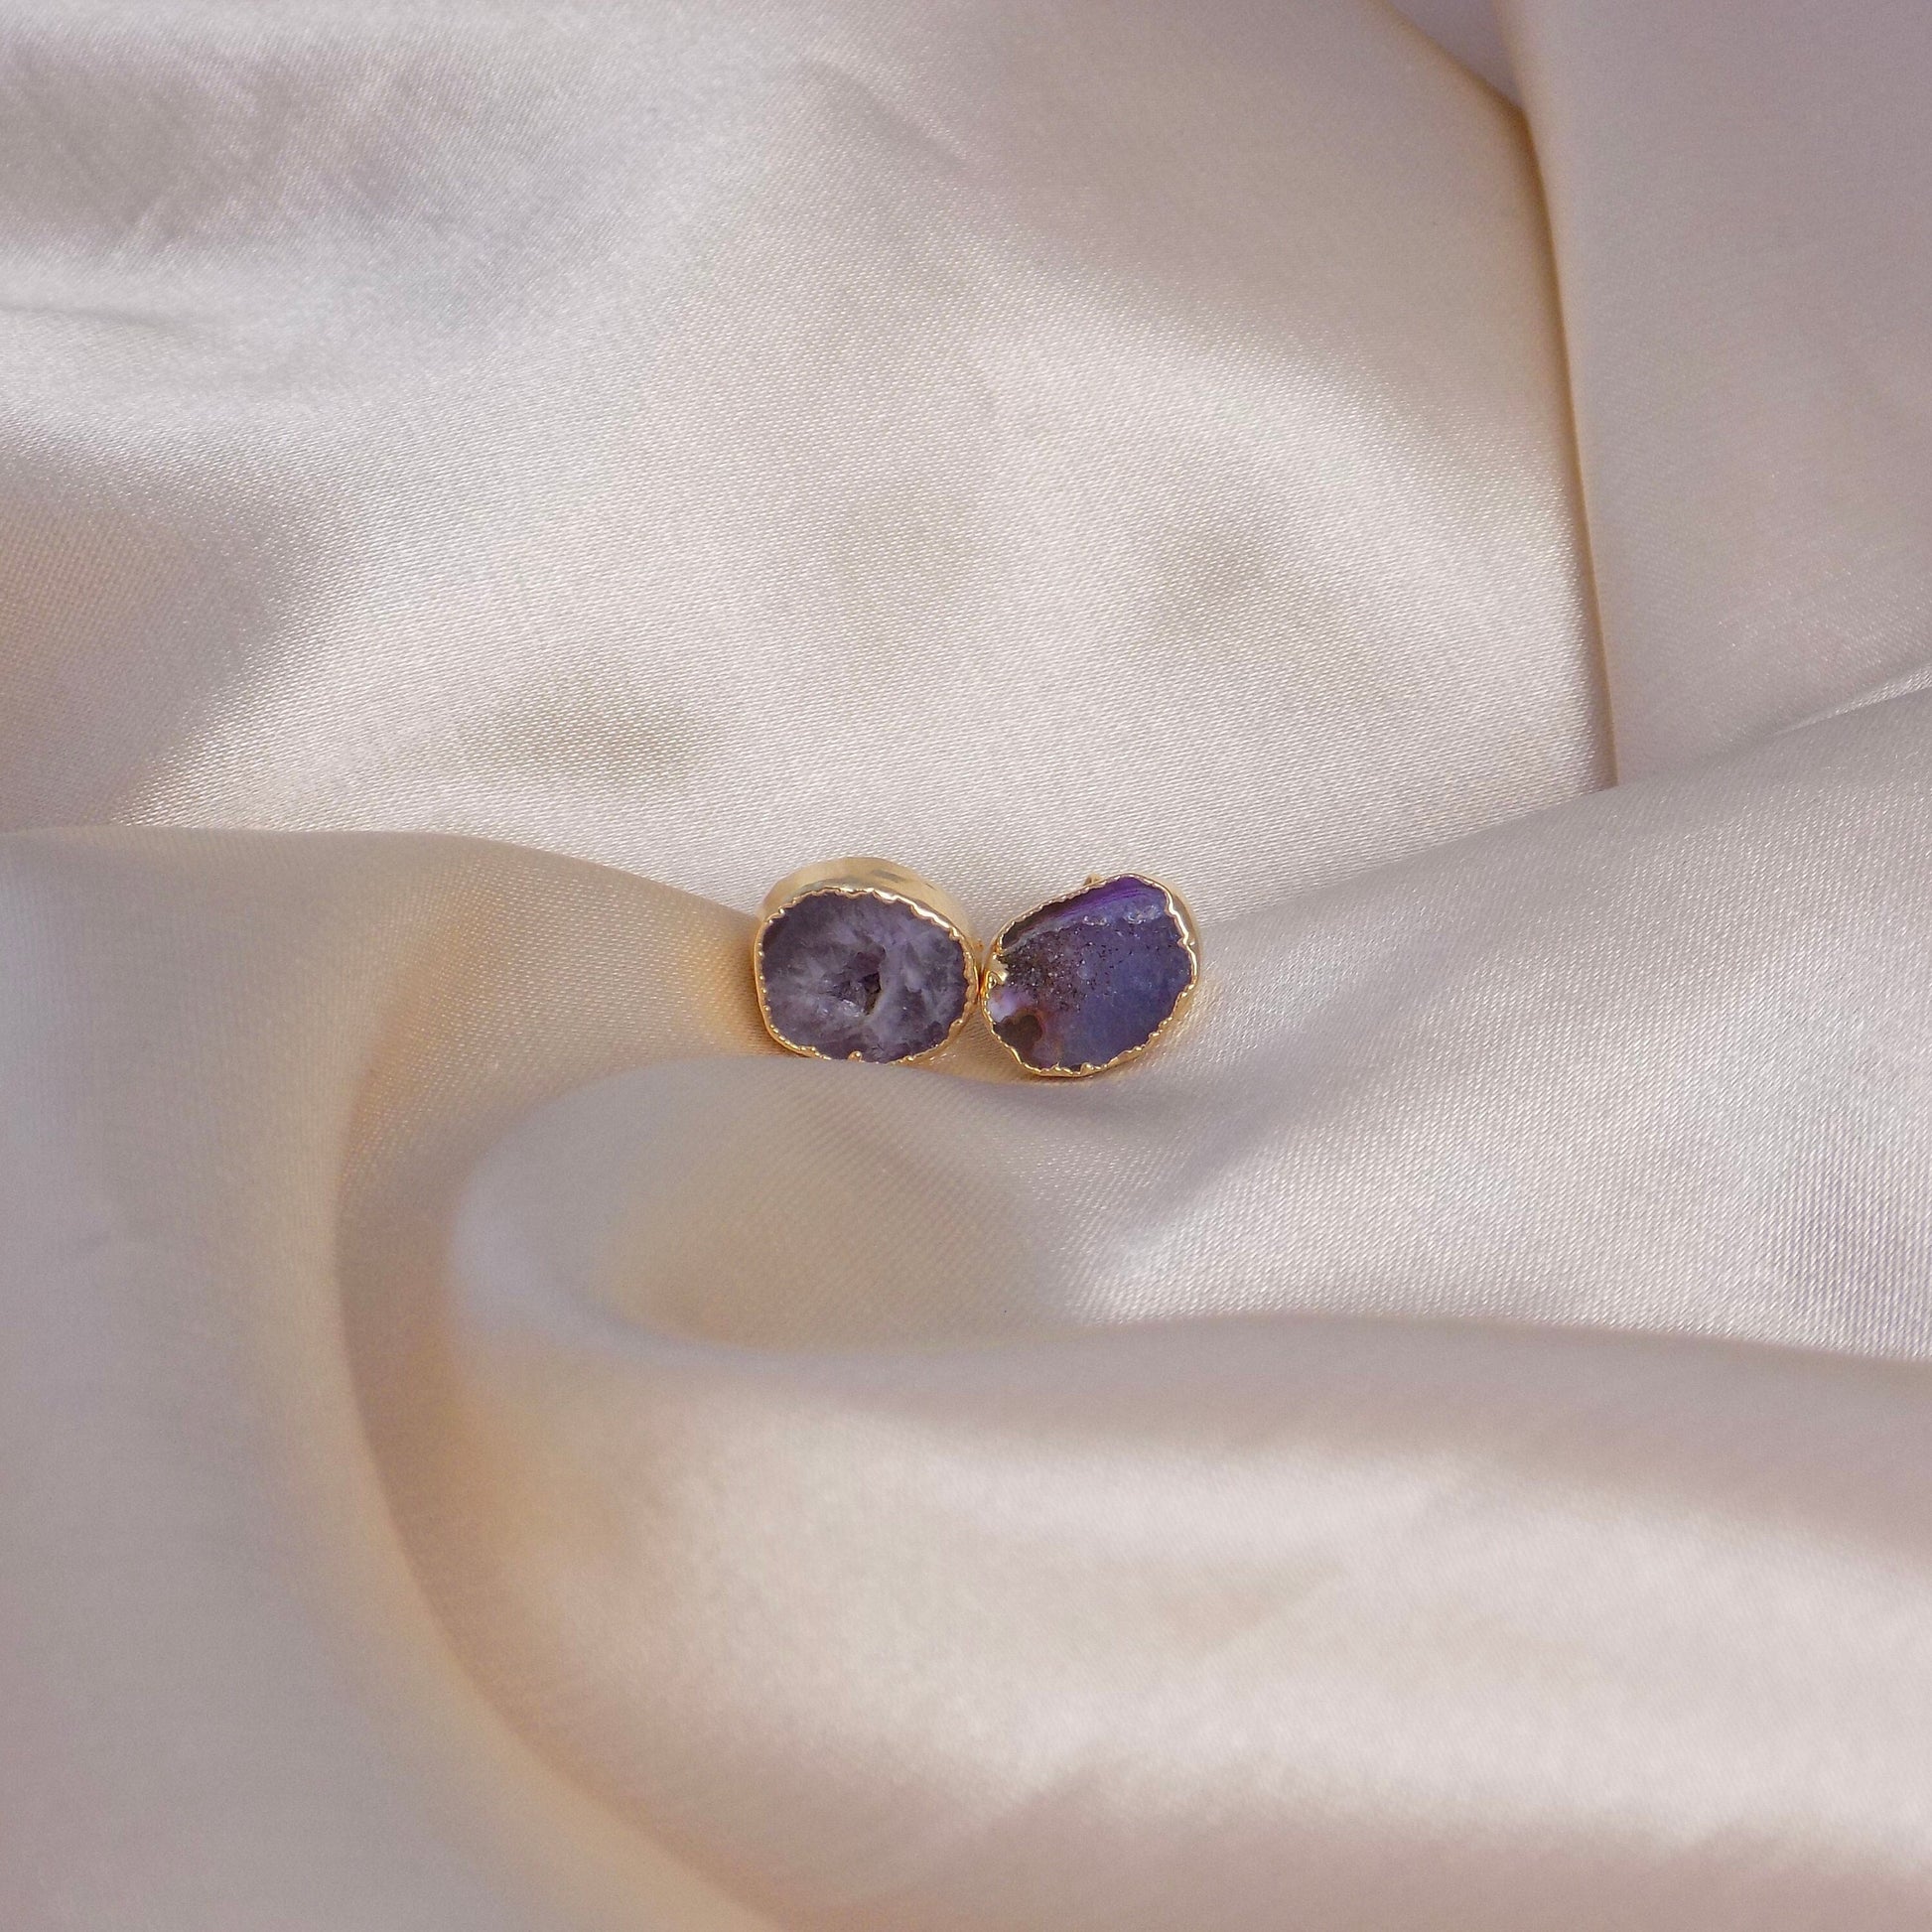 Purple Geode Earrings Studs, Raw Crystal Earrings, Bridesmaid Gifts, Gift For Wife, G15-10